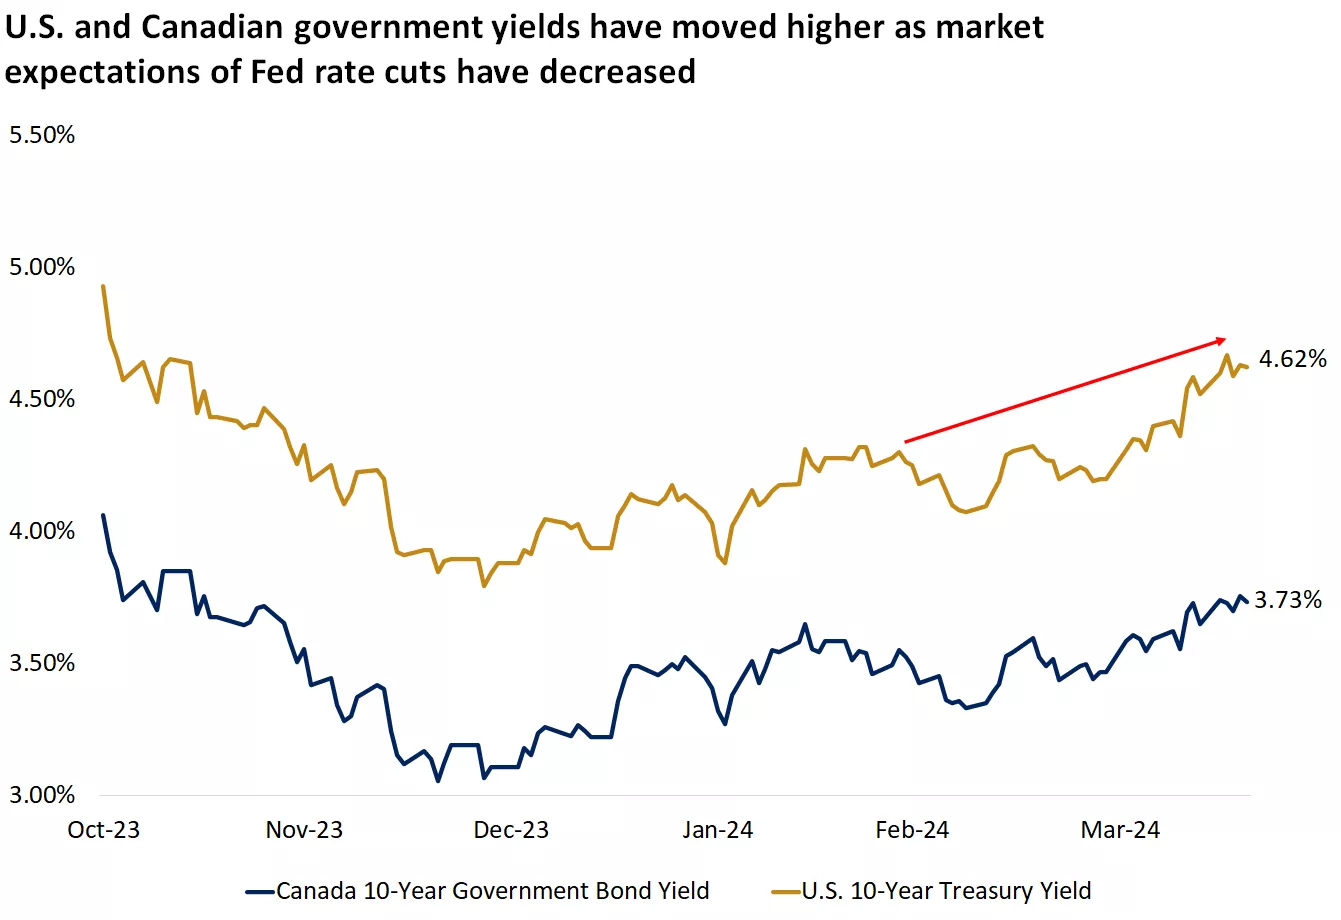  Chart showing 10-year GoC yield and 10-year U.S. Treasury yield have moved higher in the past several months.
